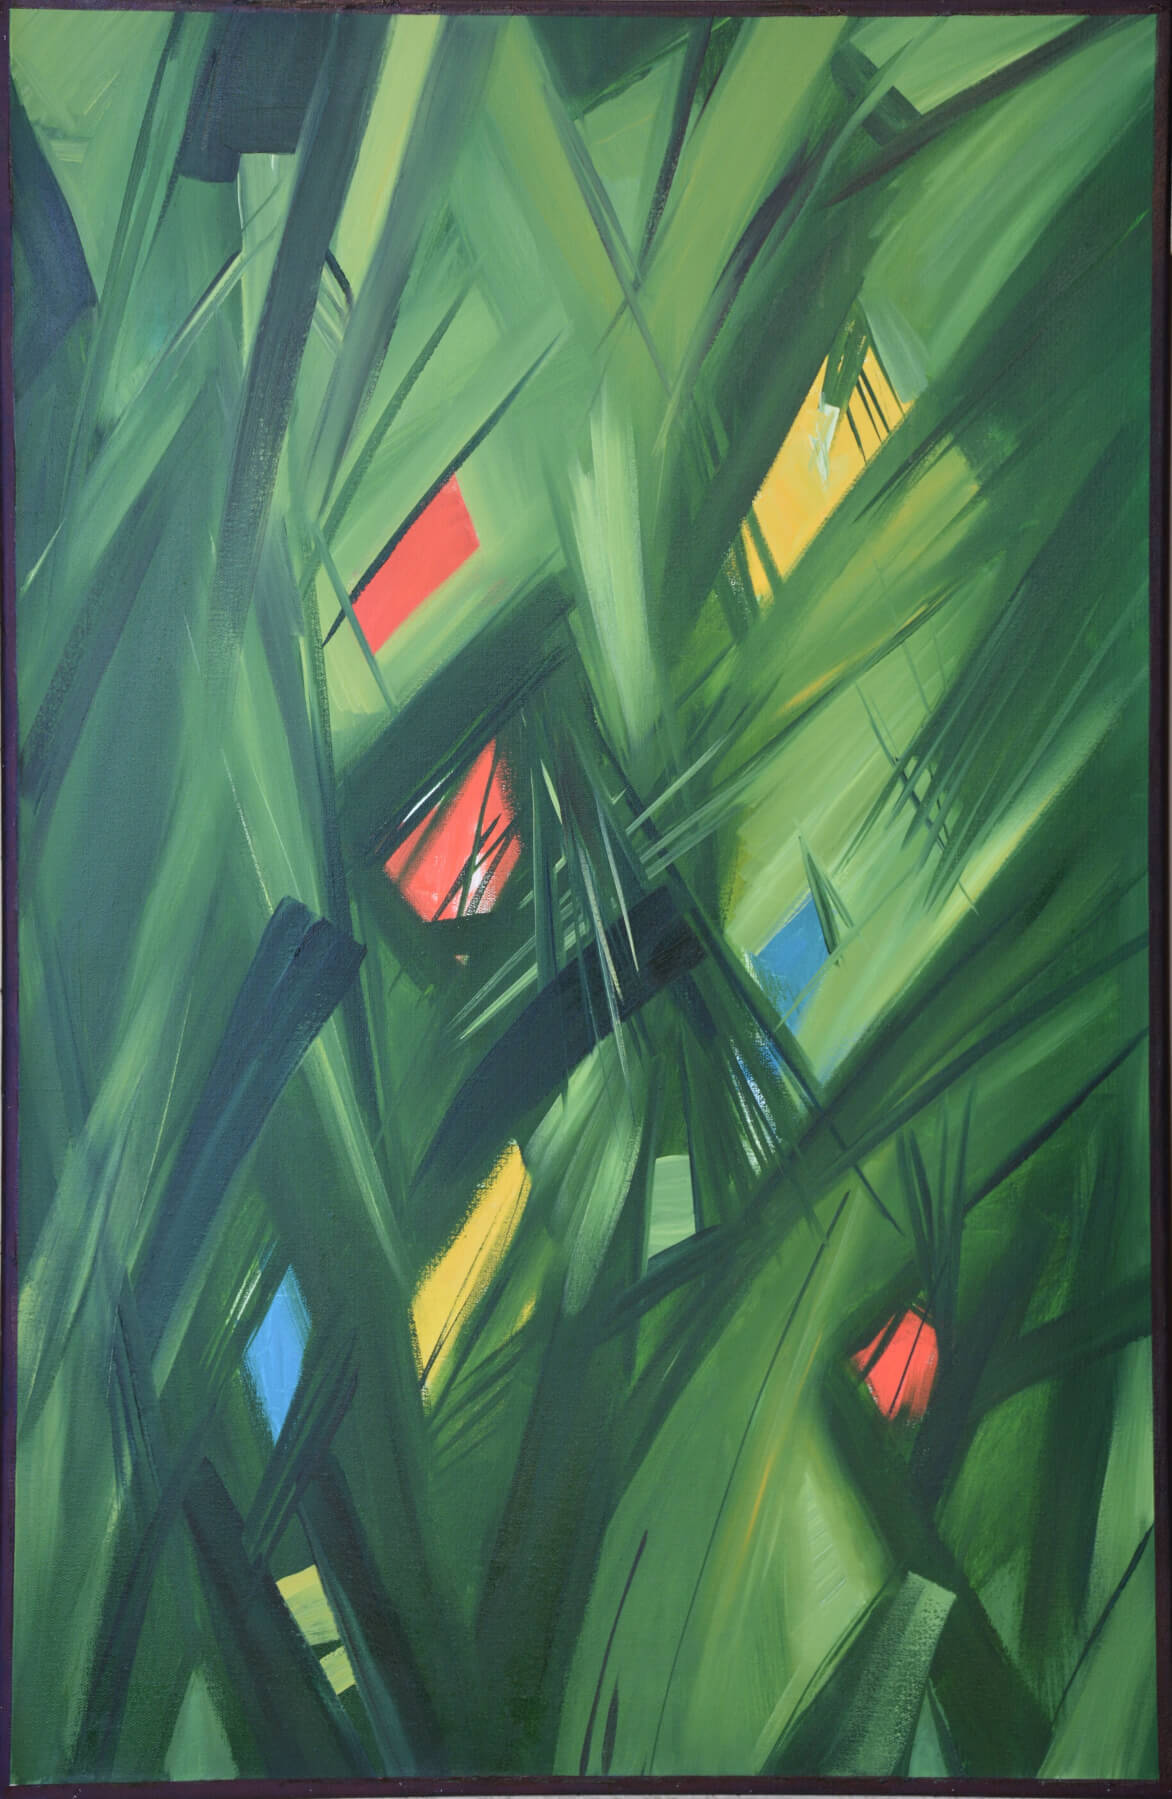 Green Abstraction by Hovhannes Aghekyan. Painting: Canvas / Oil Paint.